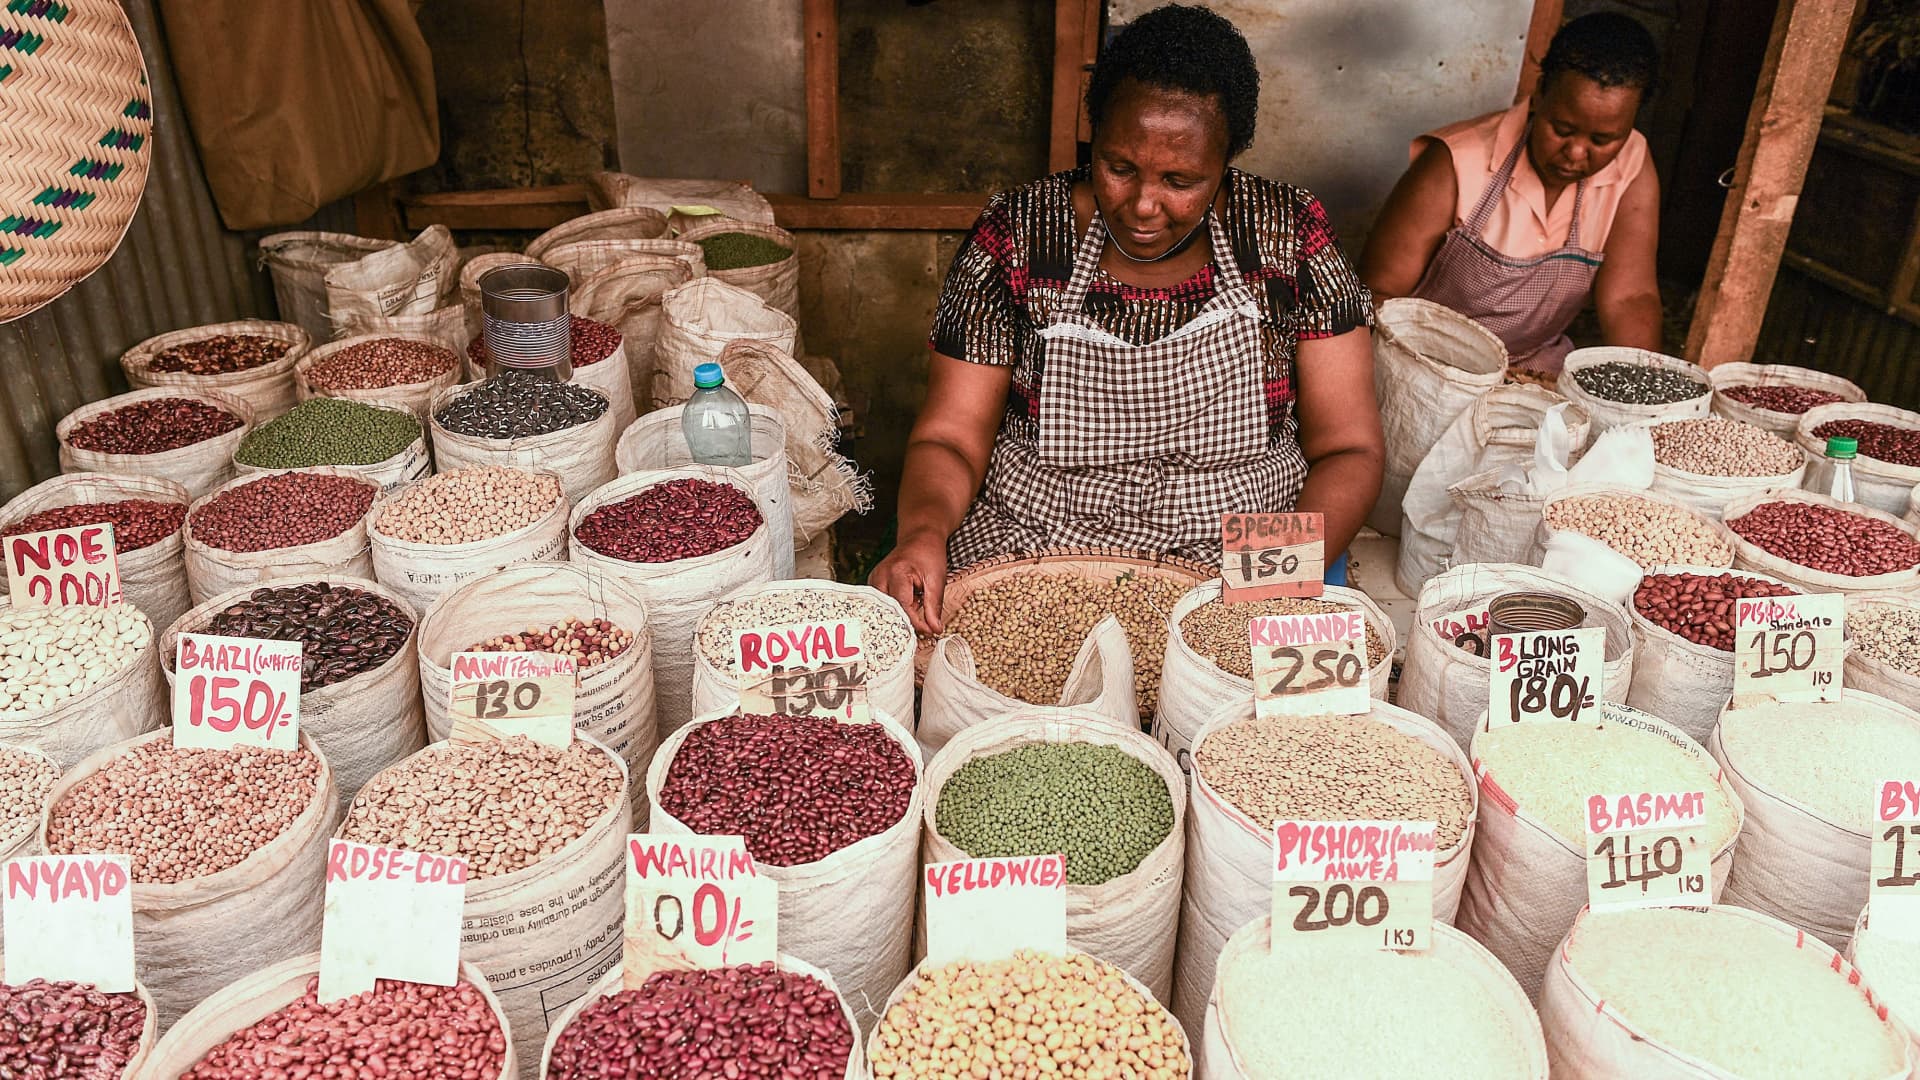 A vendor sells cereals in Nairobi on March 16, 2022. African countries are feeling the pain of Ukraine's crisis as supply disruptions hike inflation and oil prices push up fuel costs.